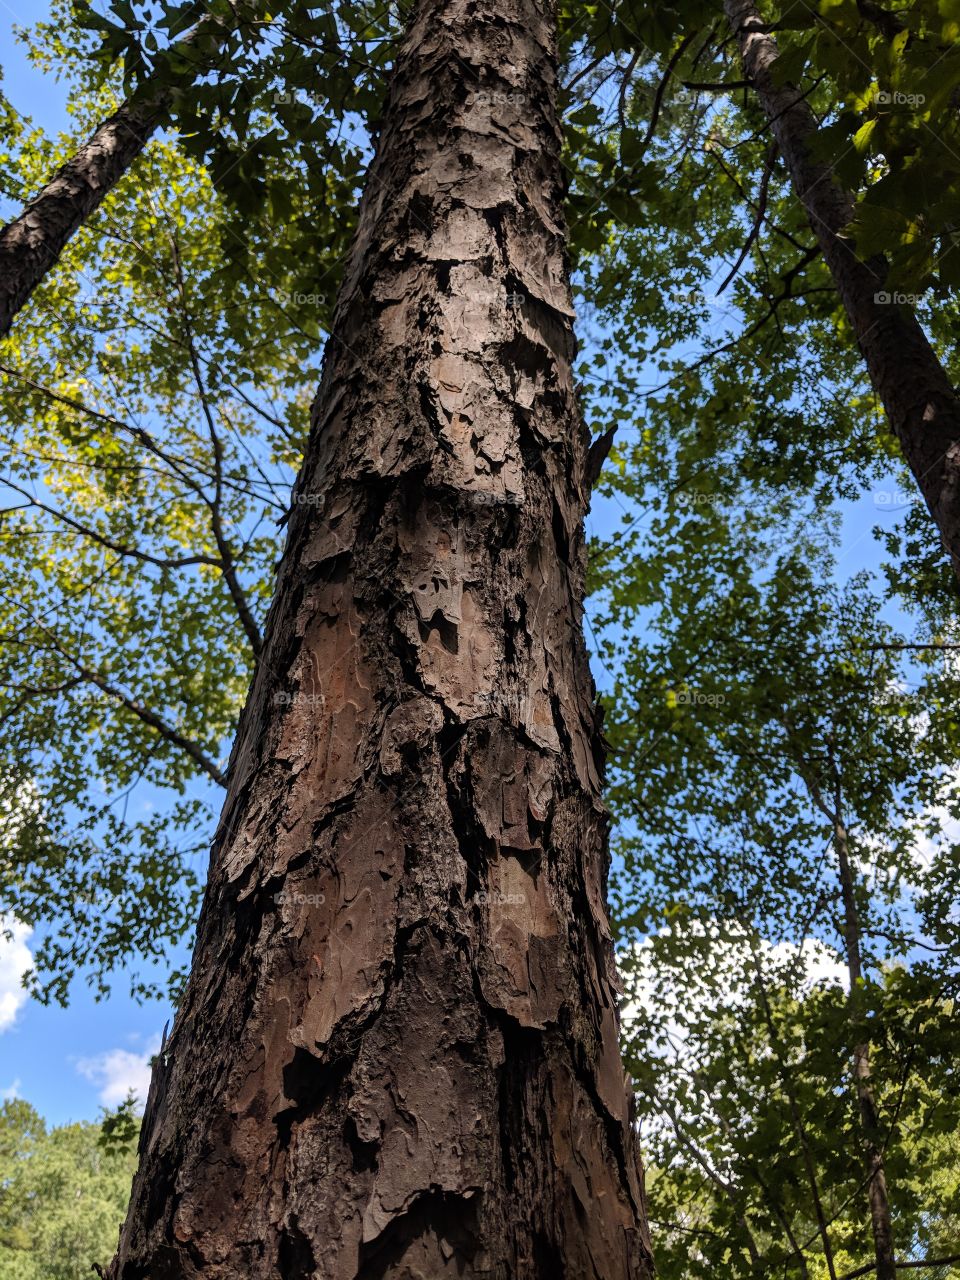 closeup of an old tree against the sky, with cracking bark, in a North Carolina forest wood.